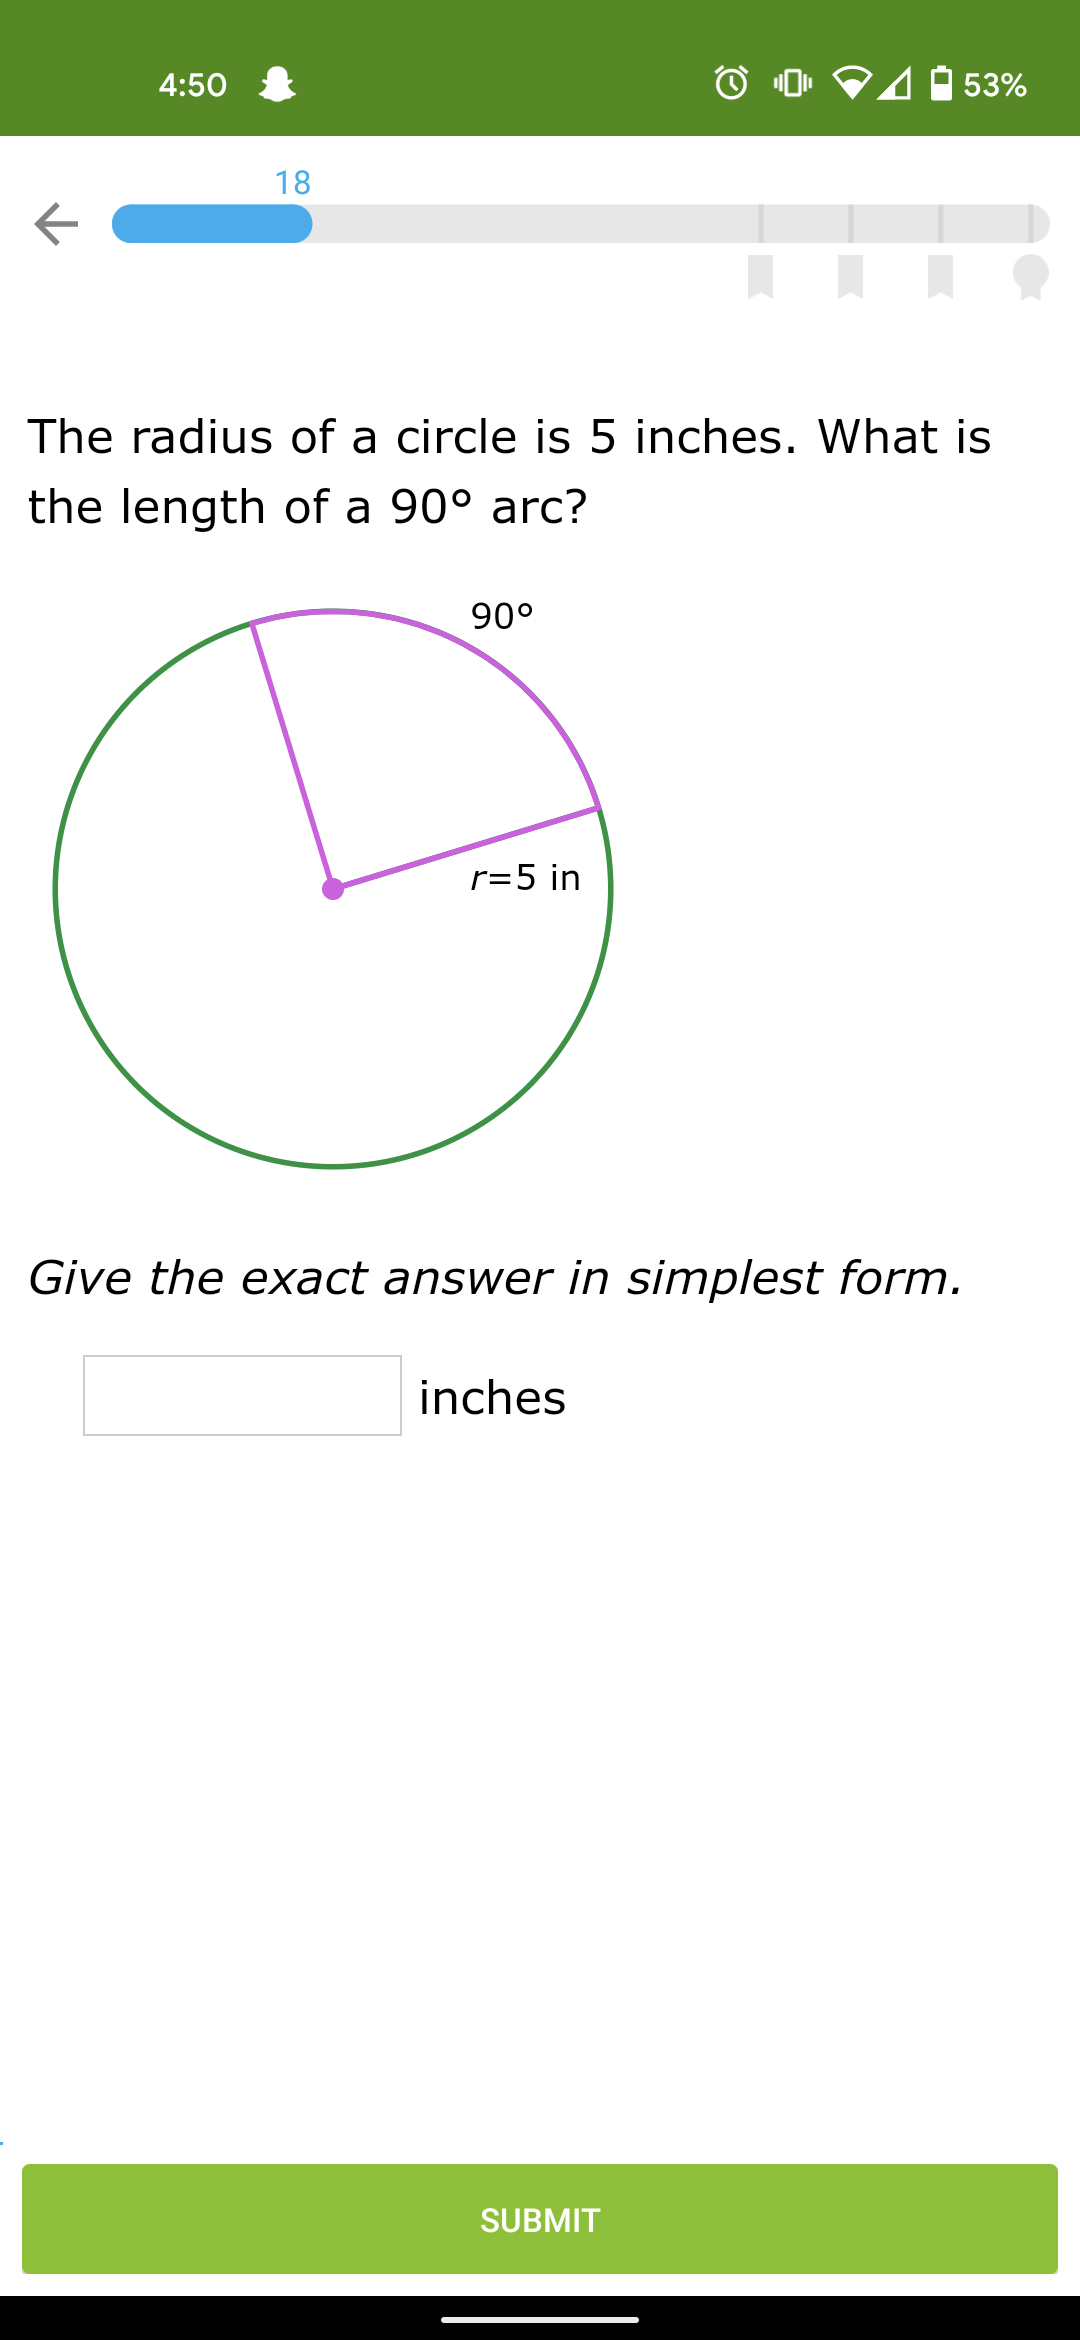 4:50
24 53%
18
The radius of a circle is 5 inches. What is
the length of a 90° arc?
90°
r=5 in
Give the exact answer in simplest form.
inches
SUBMIT
